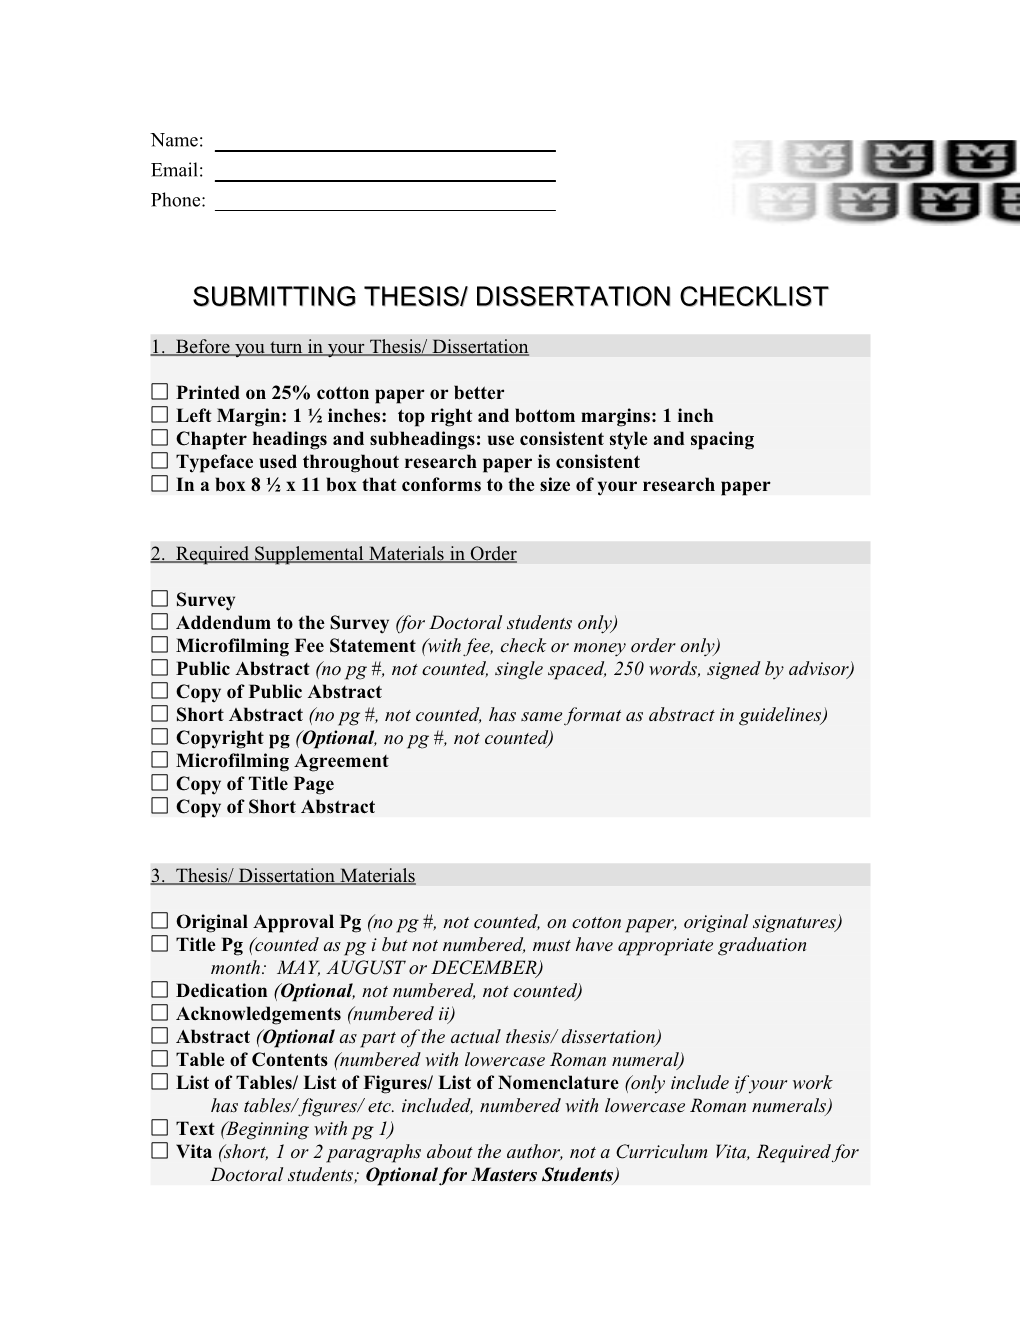 Submitting Thesis/ Dissertation Checklist